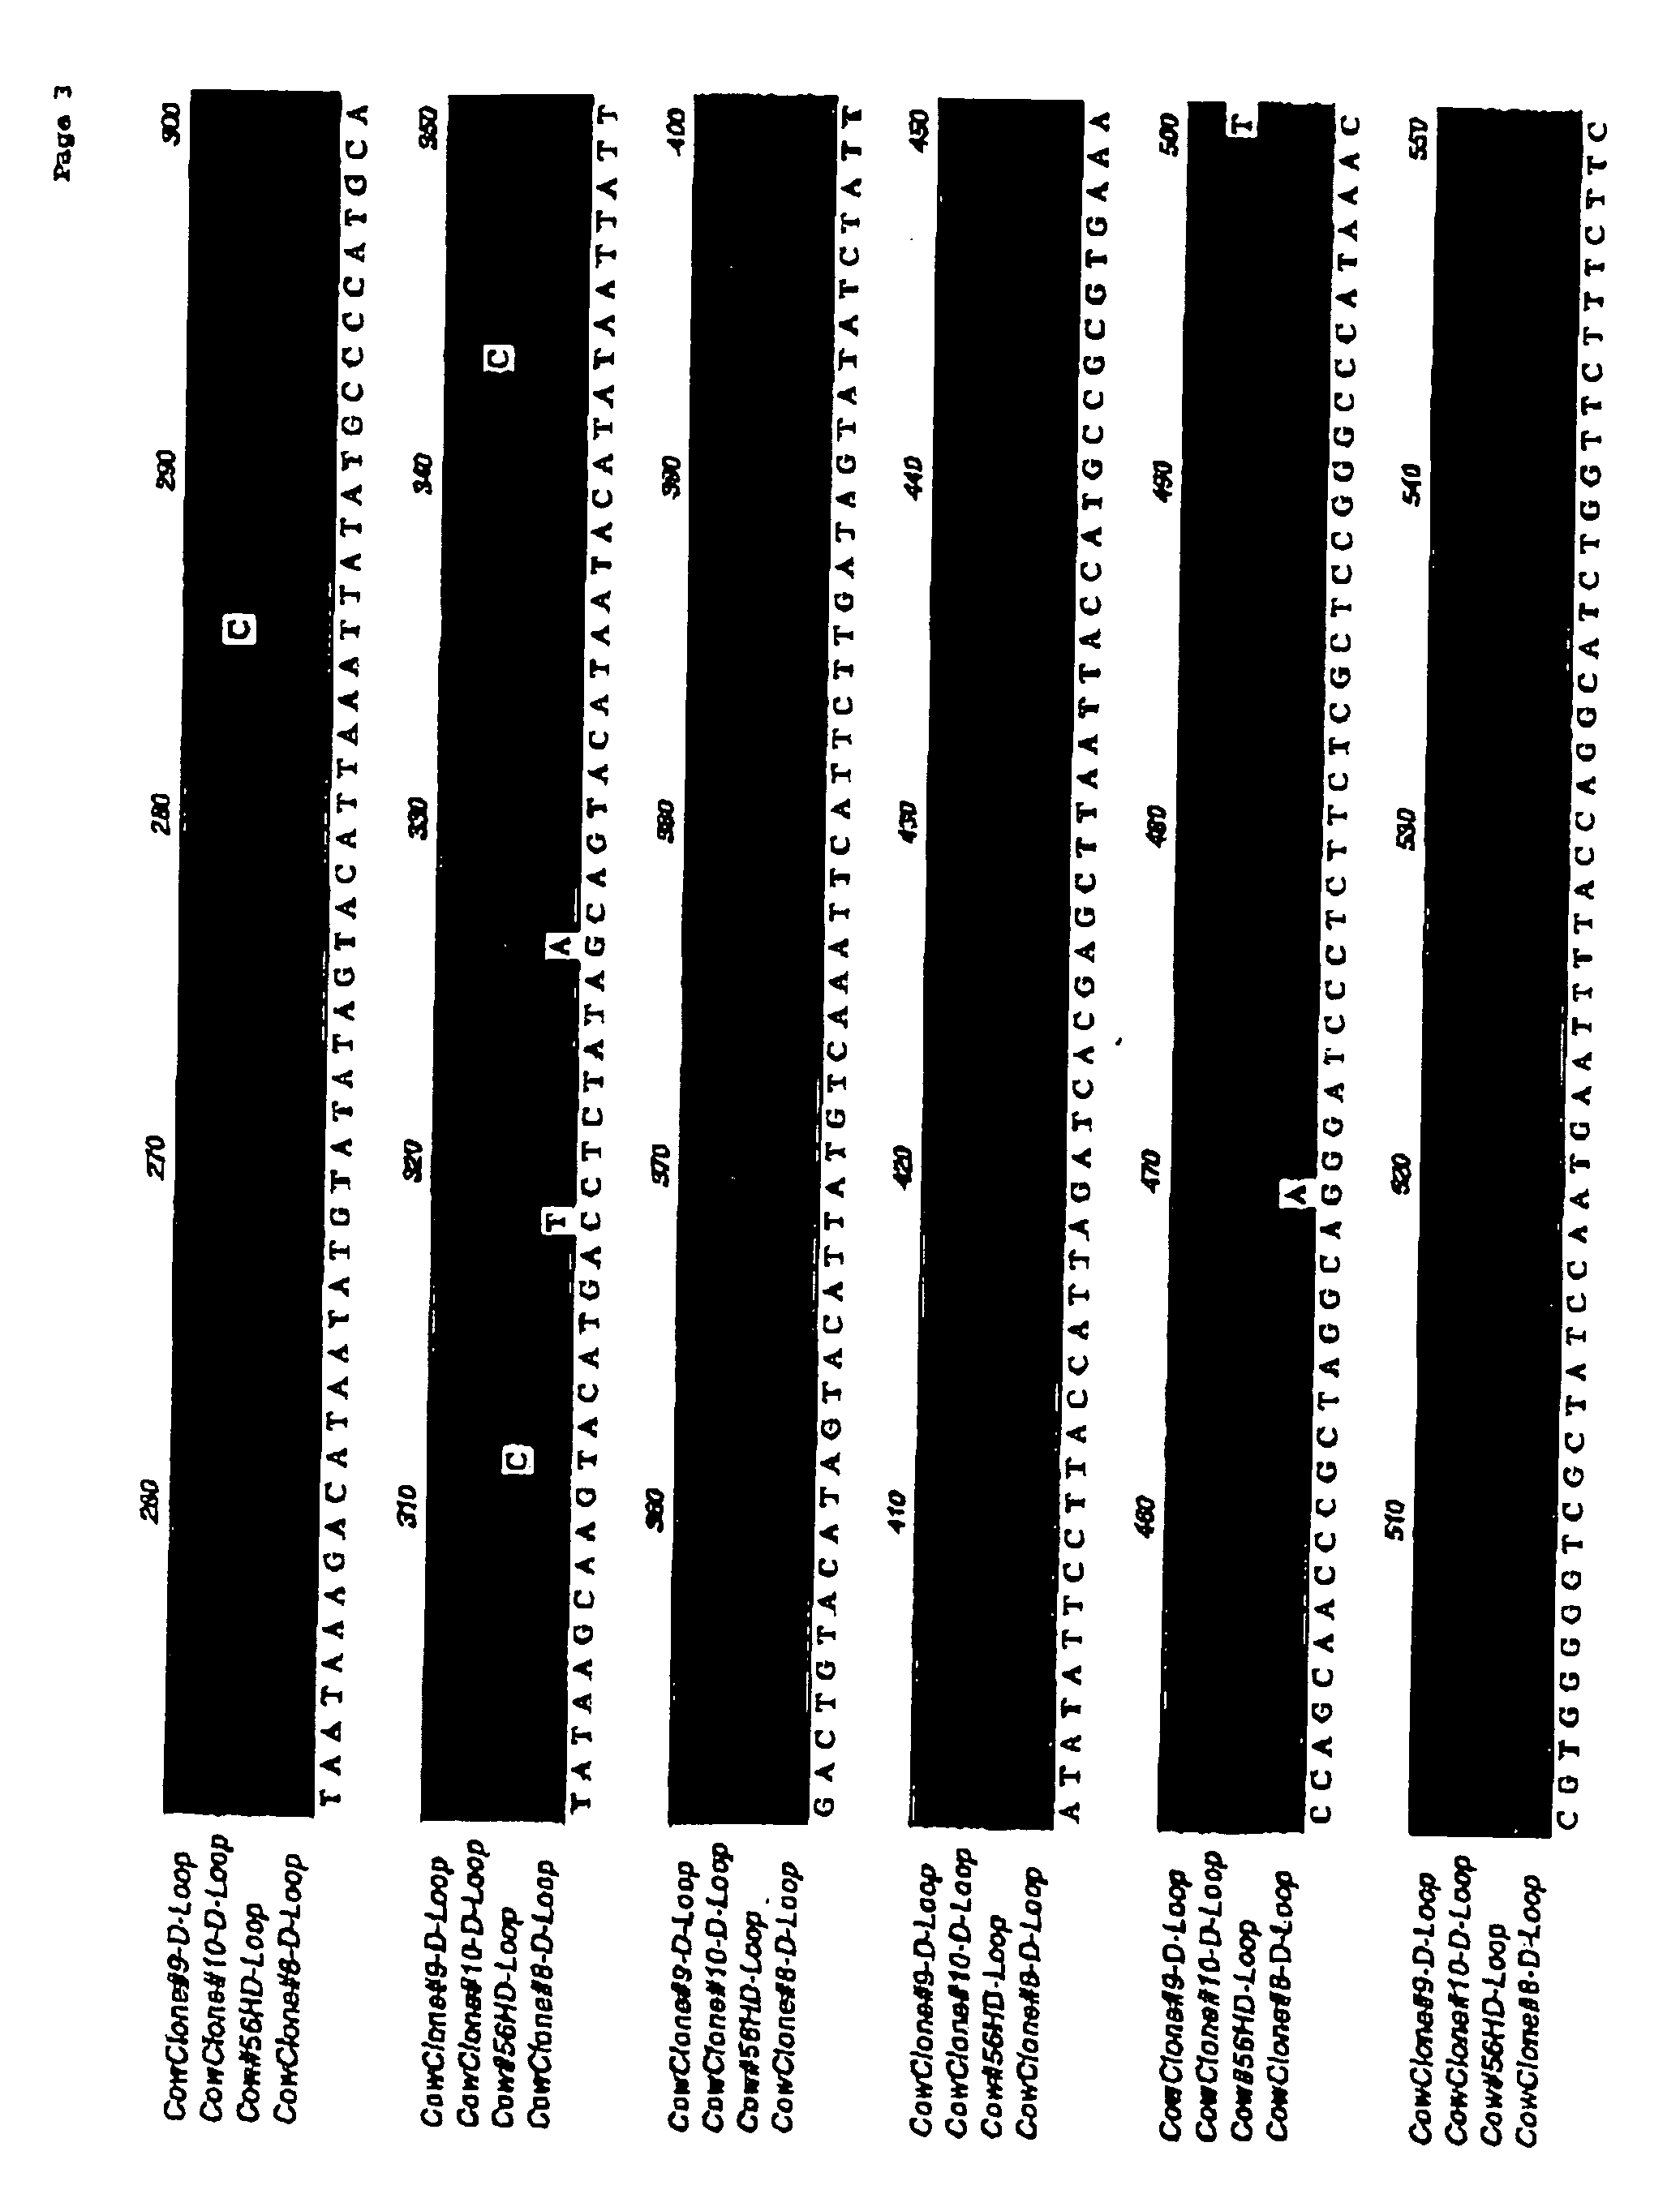 Method for generating immune-compatible cells and tissues using nuclear transfer techniques